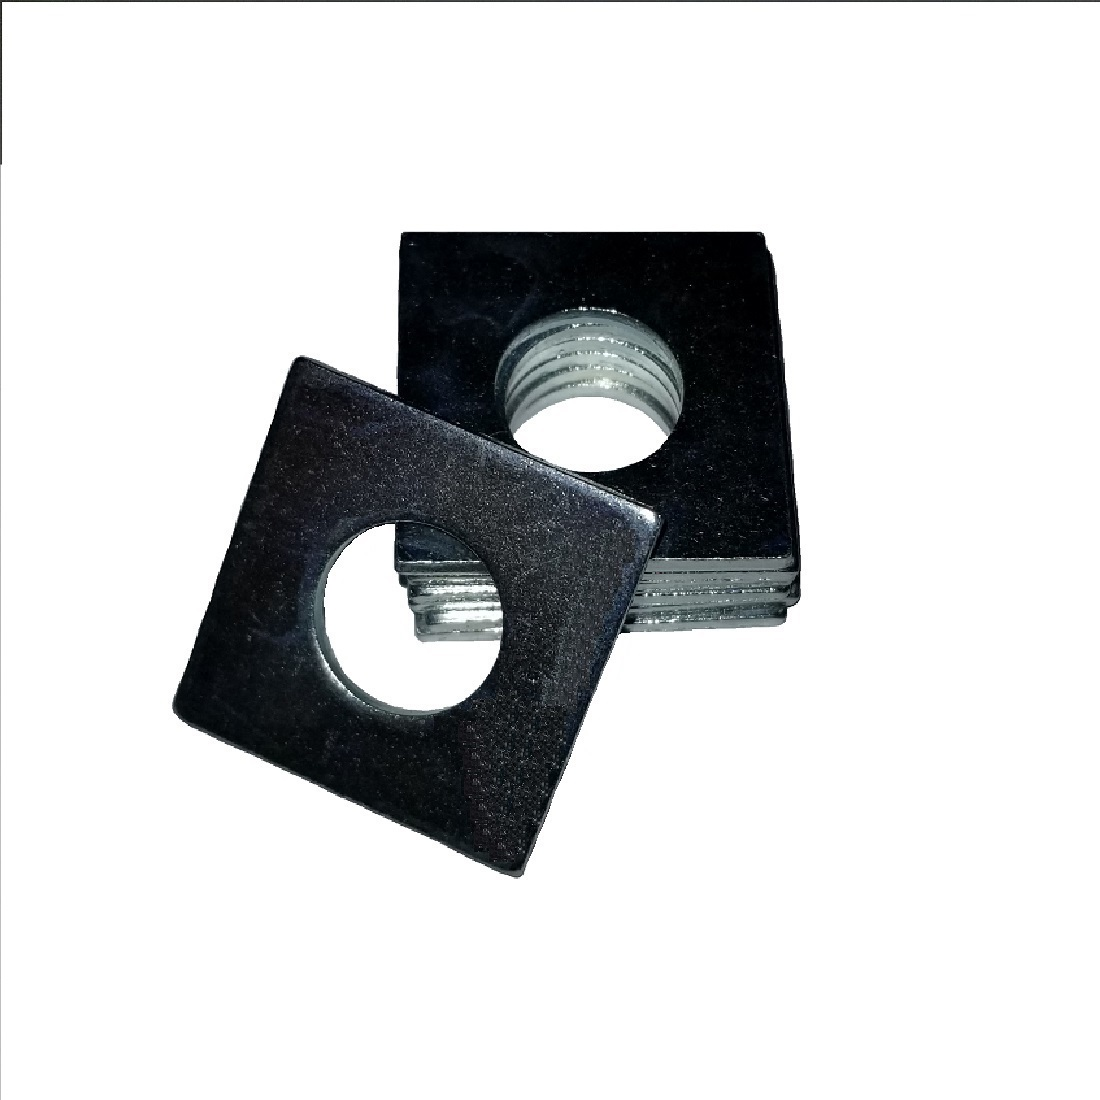 Square OD Washer - 0.085 ID, 0.187 OD, 0.040 Thick, Low Carbon Steel - Soft